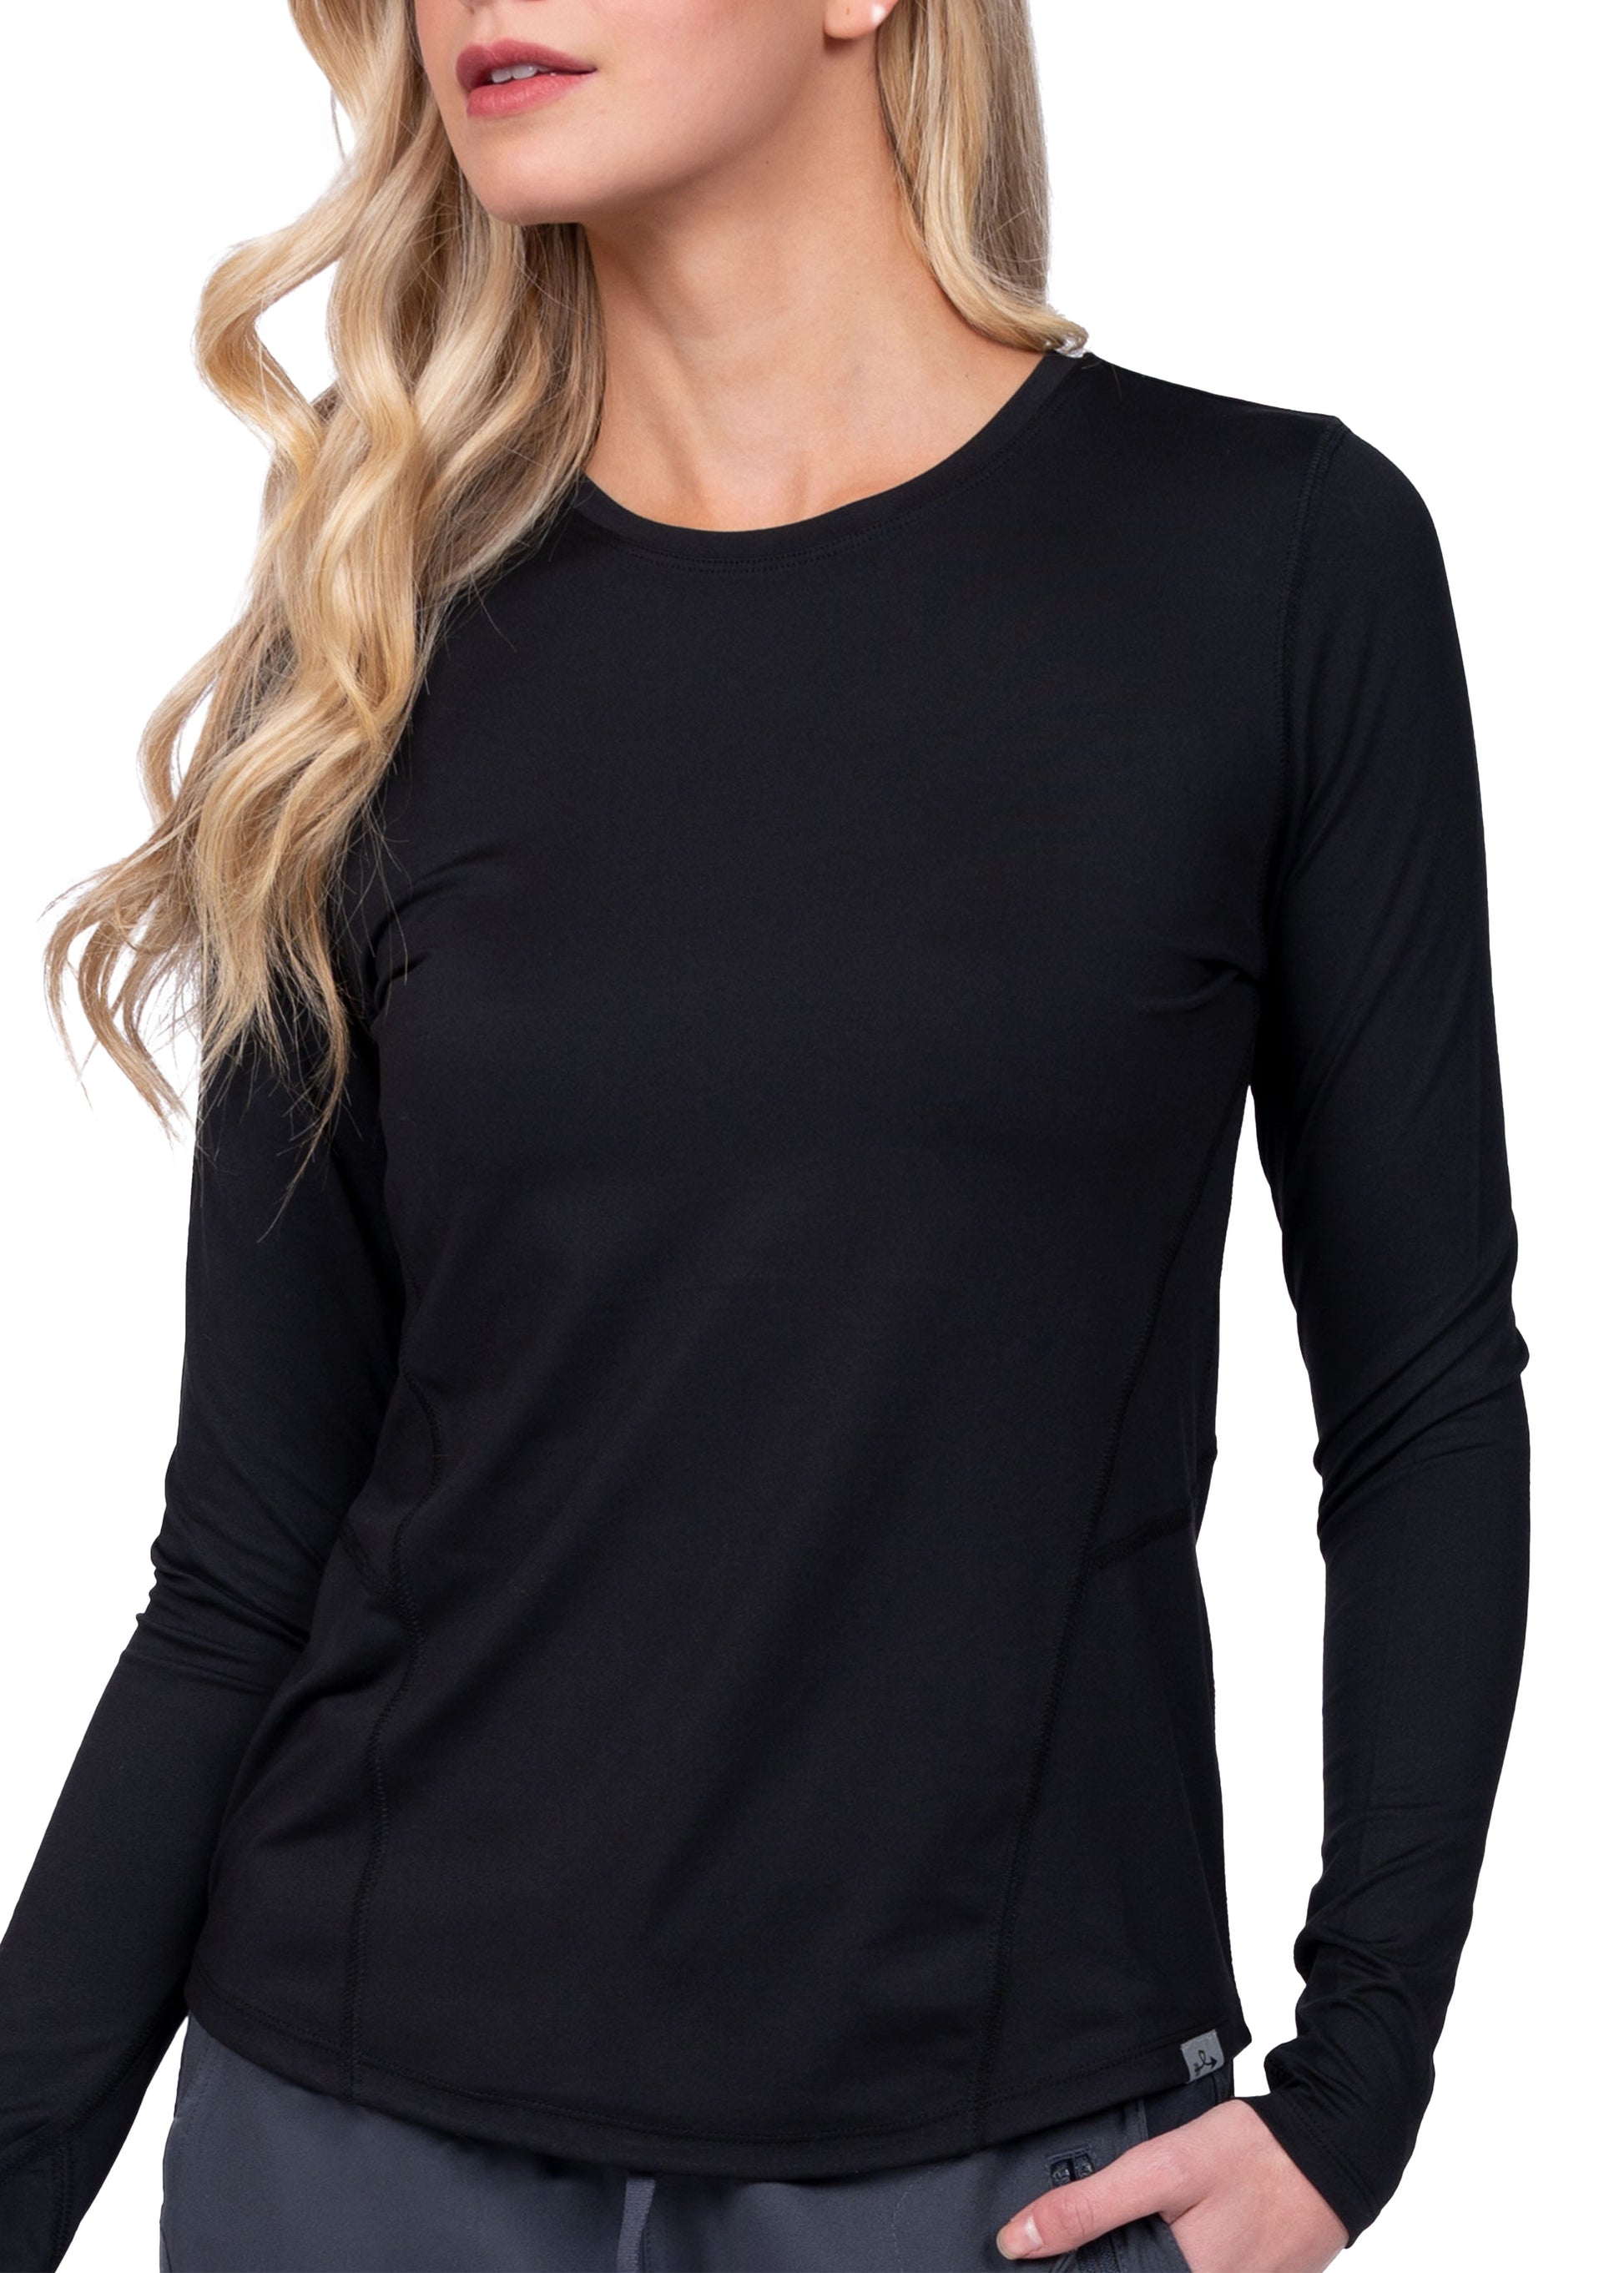 Ava Therese by Zavate 1122 Lily Brushed Knit Underscrub Tee Black